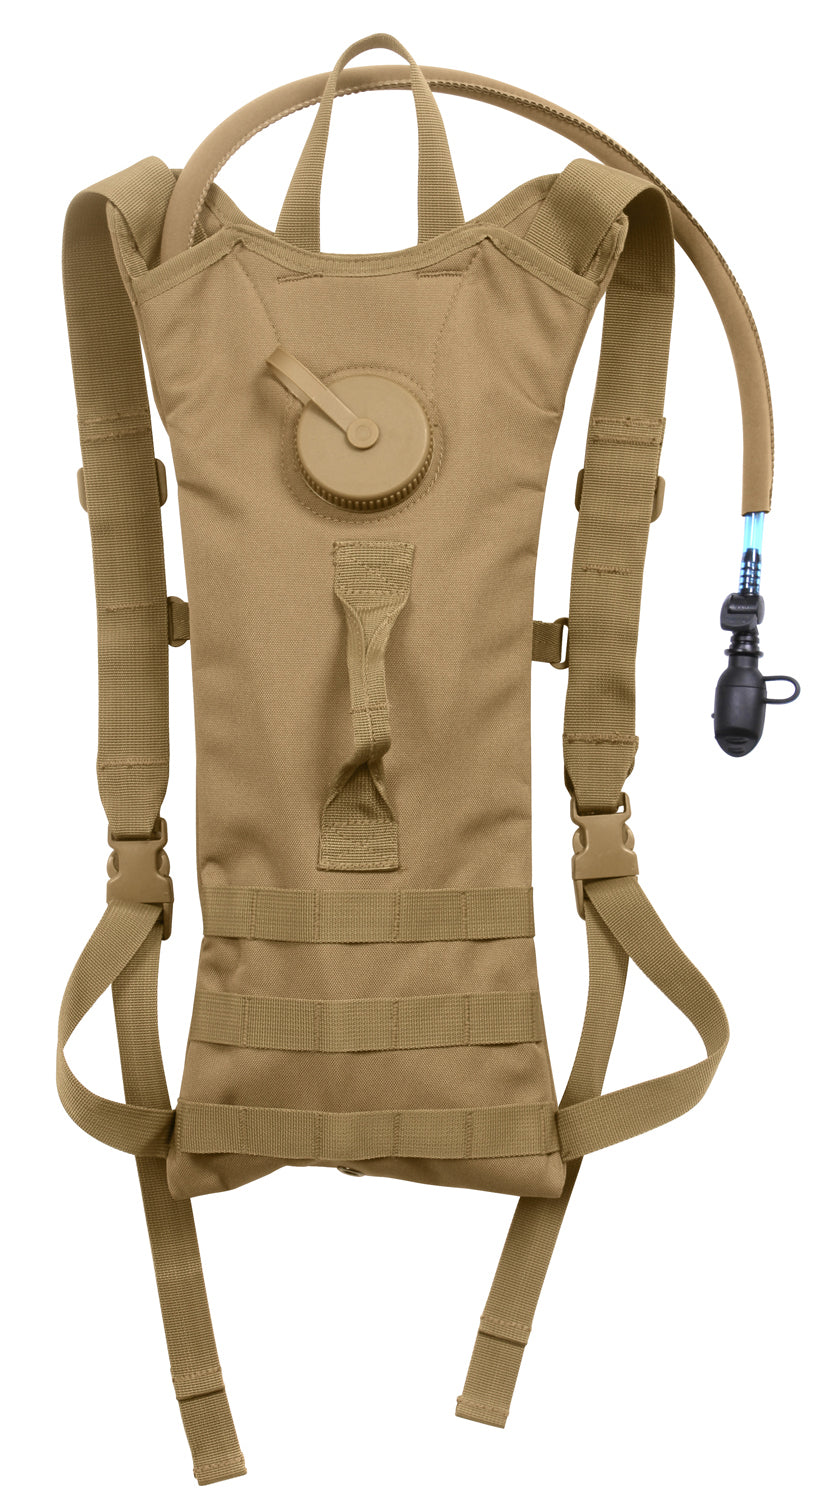 Rothco MOLLE 3 Liter Backstrap Hydration System Coyote Brown - Final Sale Ships Same Day